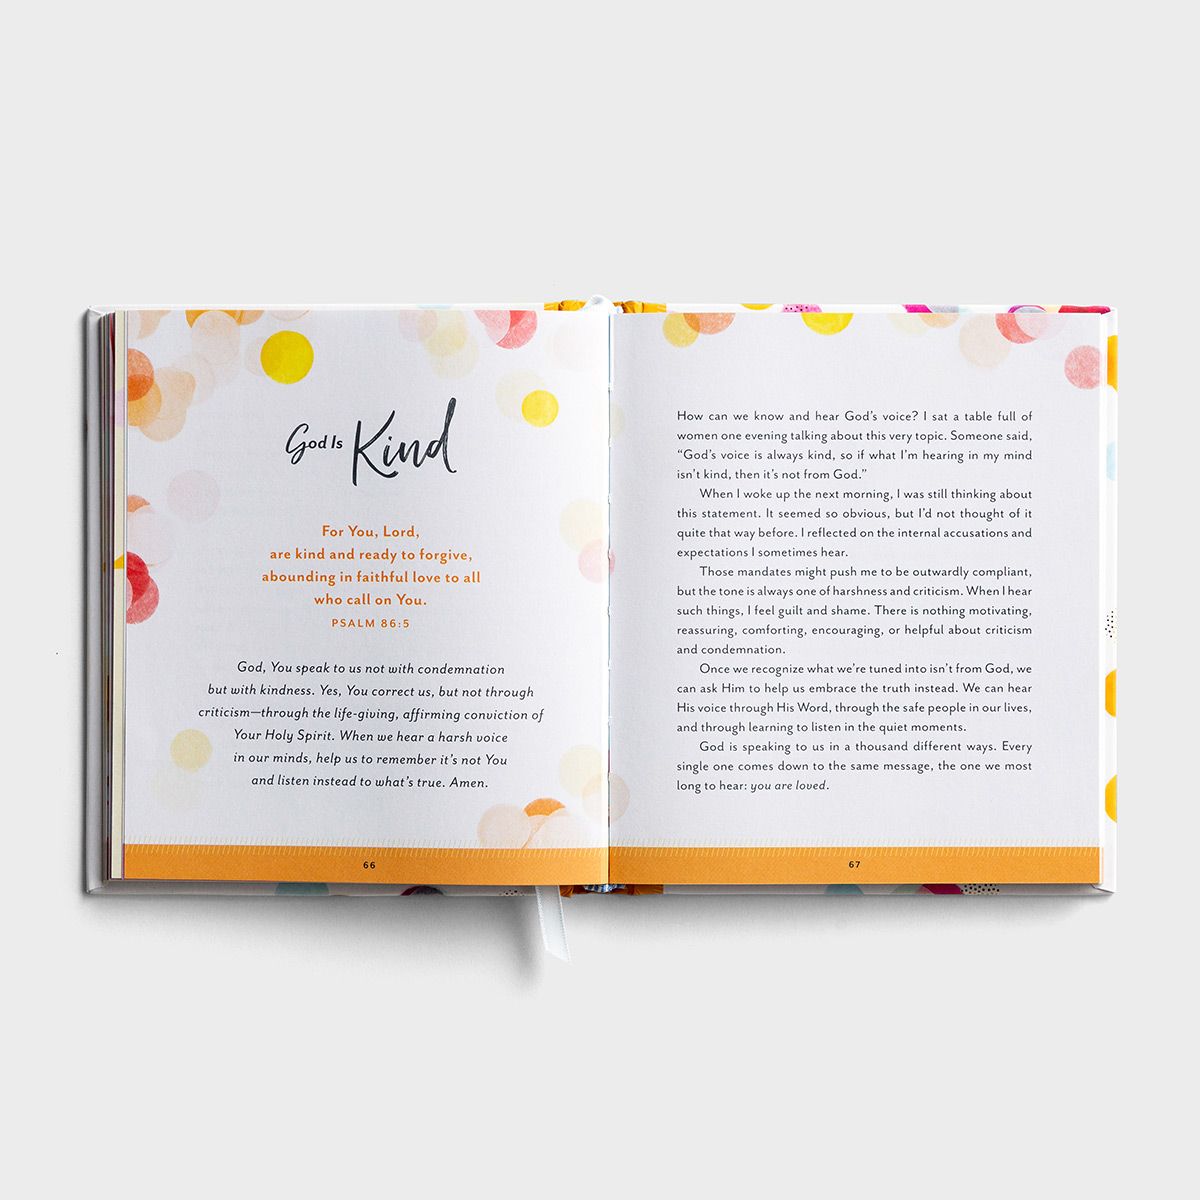 Cheering You On: 50 Reasons Why Anything Is Possible with God - The Christian Gift Company